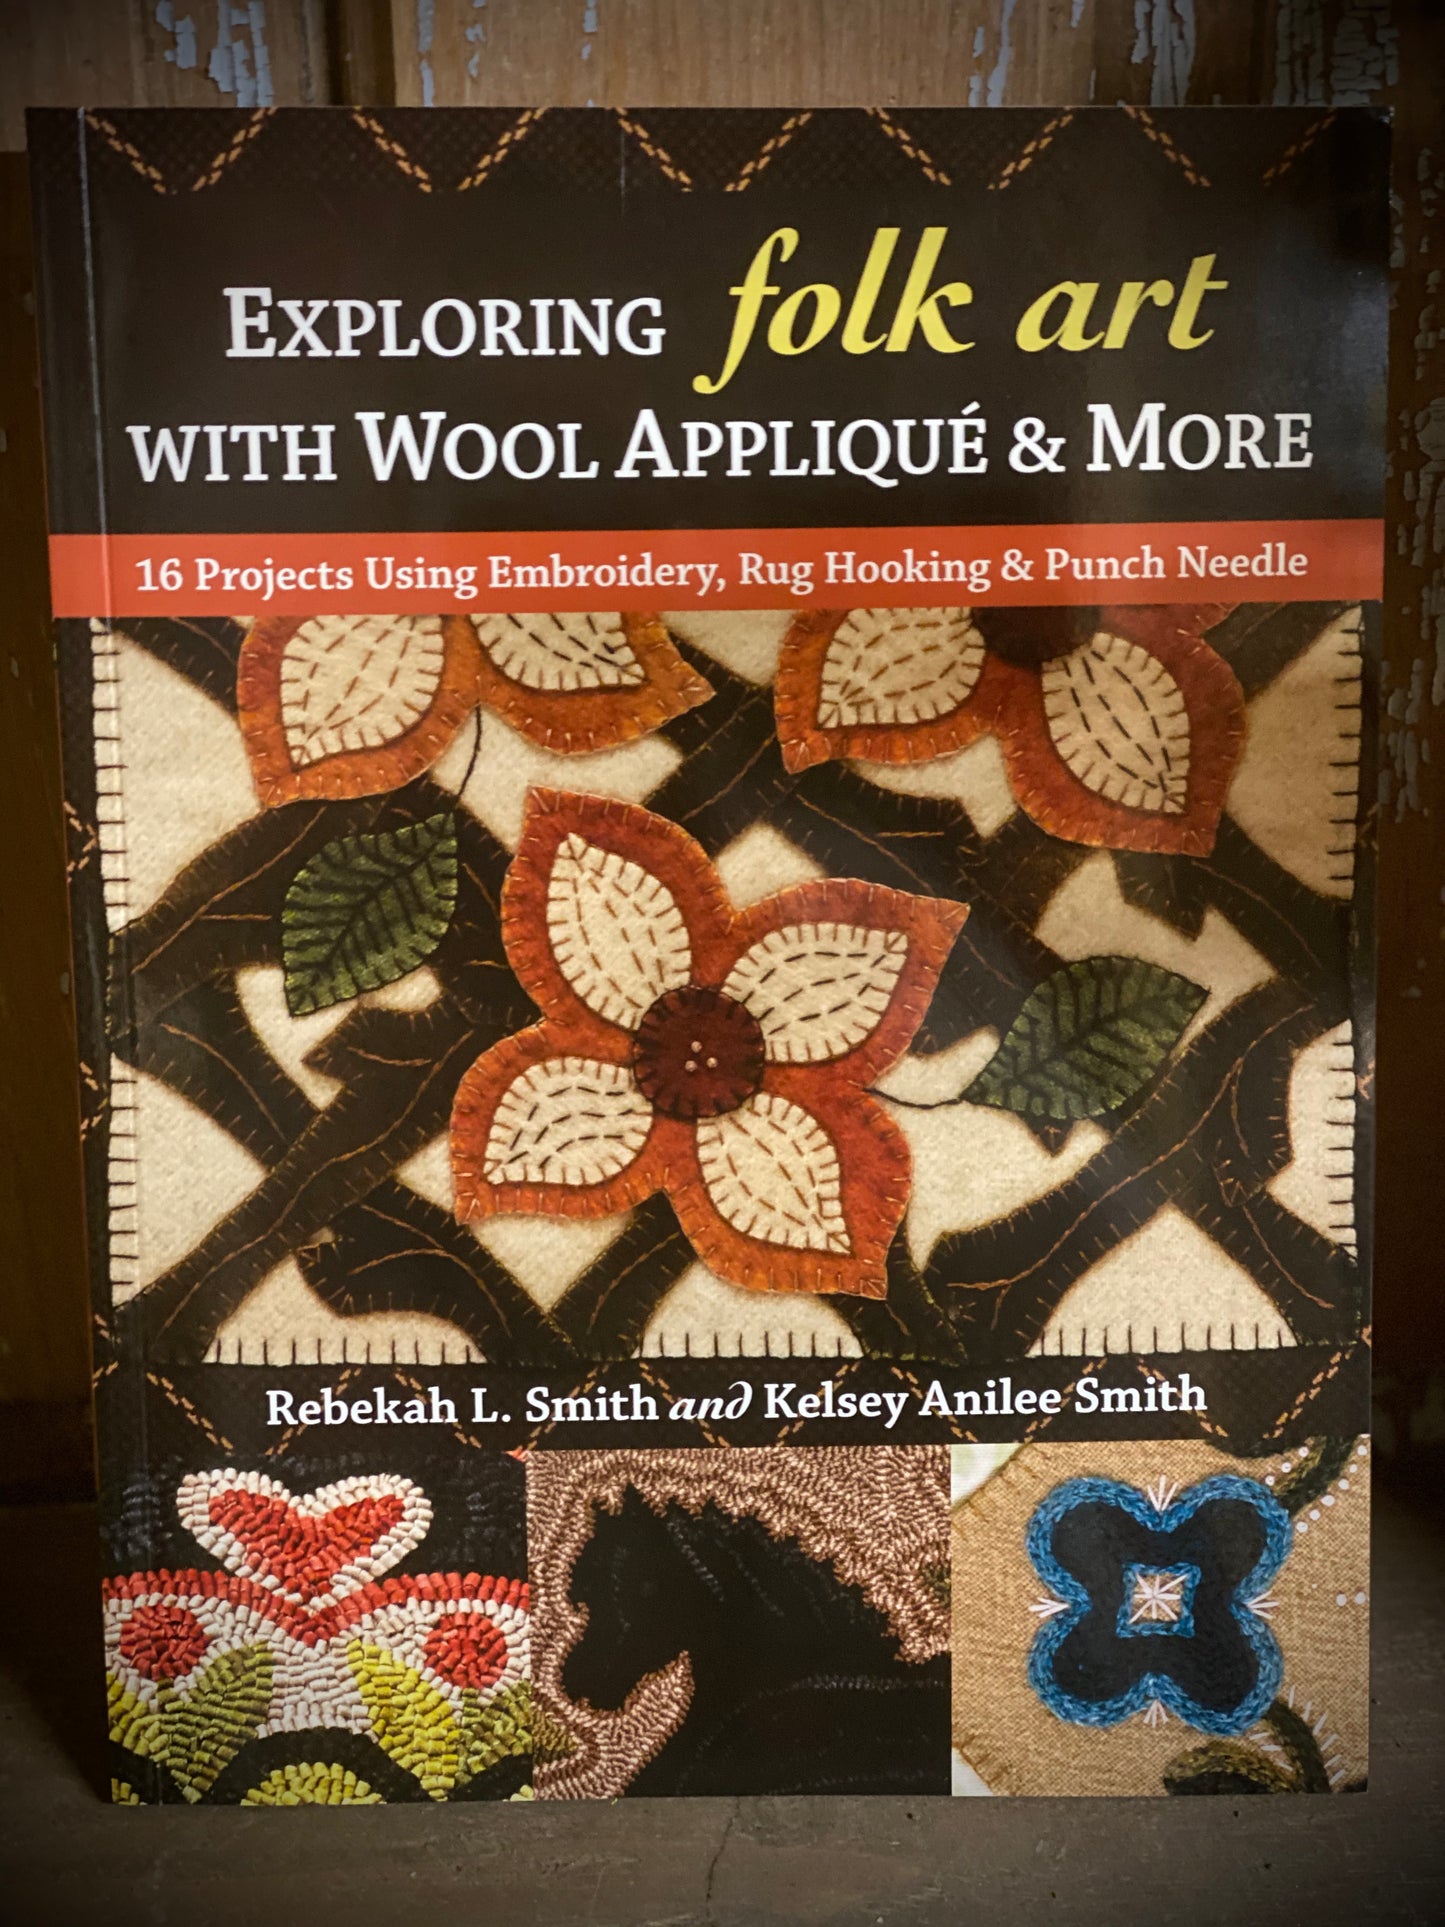 Book, Soft Cover, EXPLORING FOLK ART WITH WOOL APPLIQUE & MORE